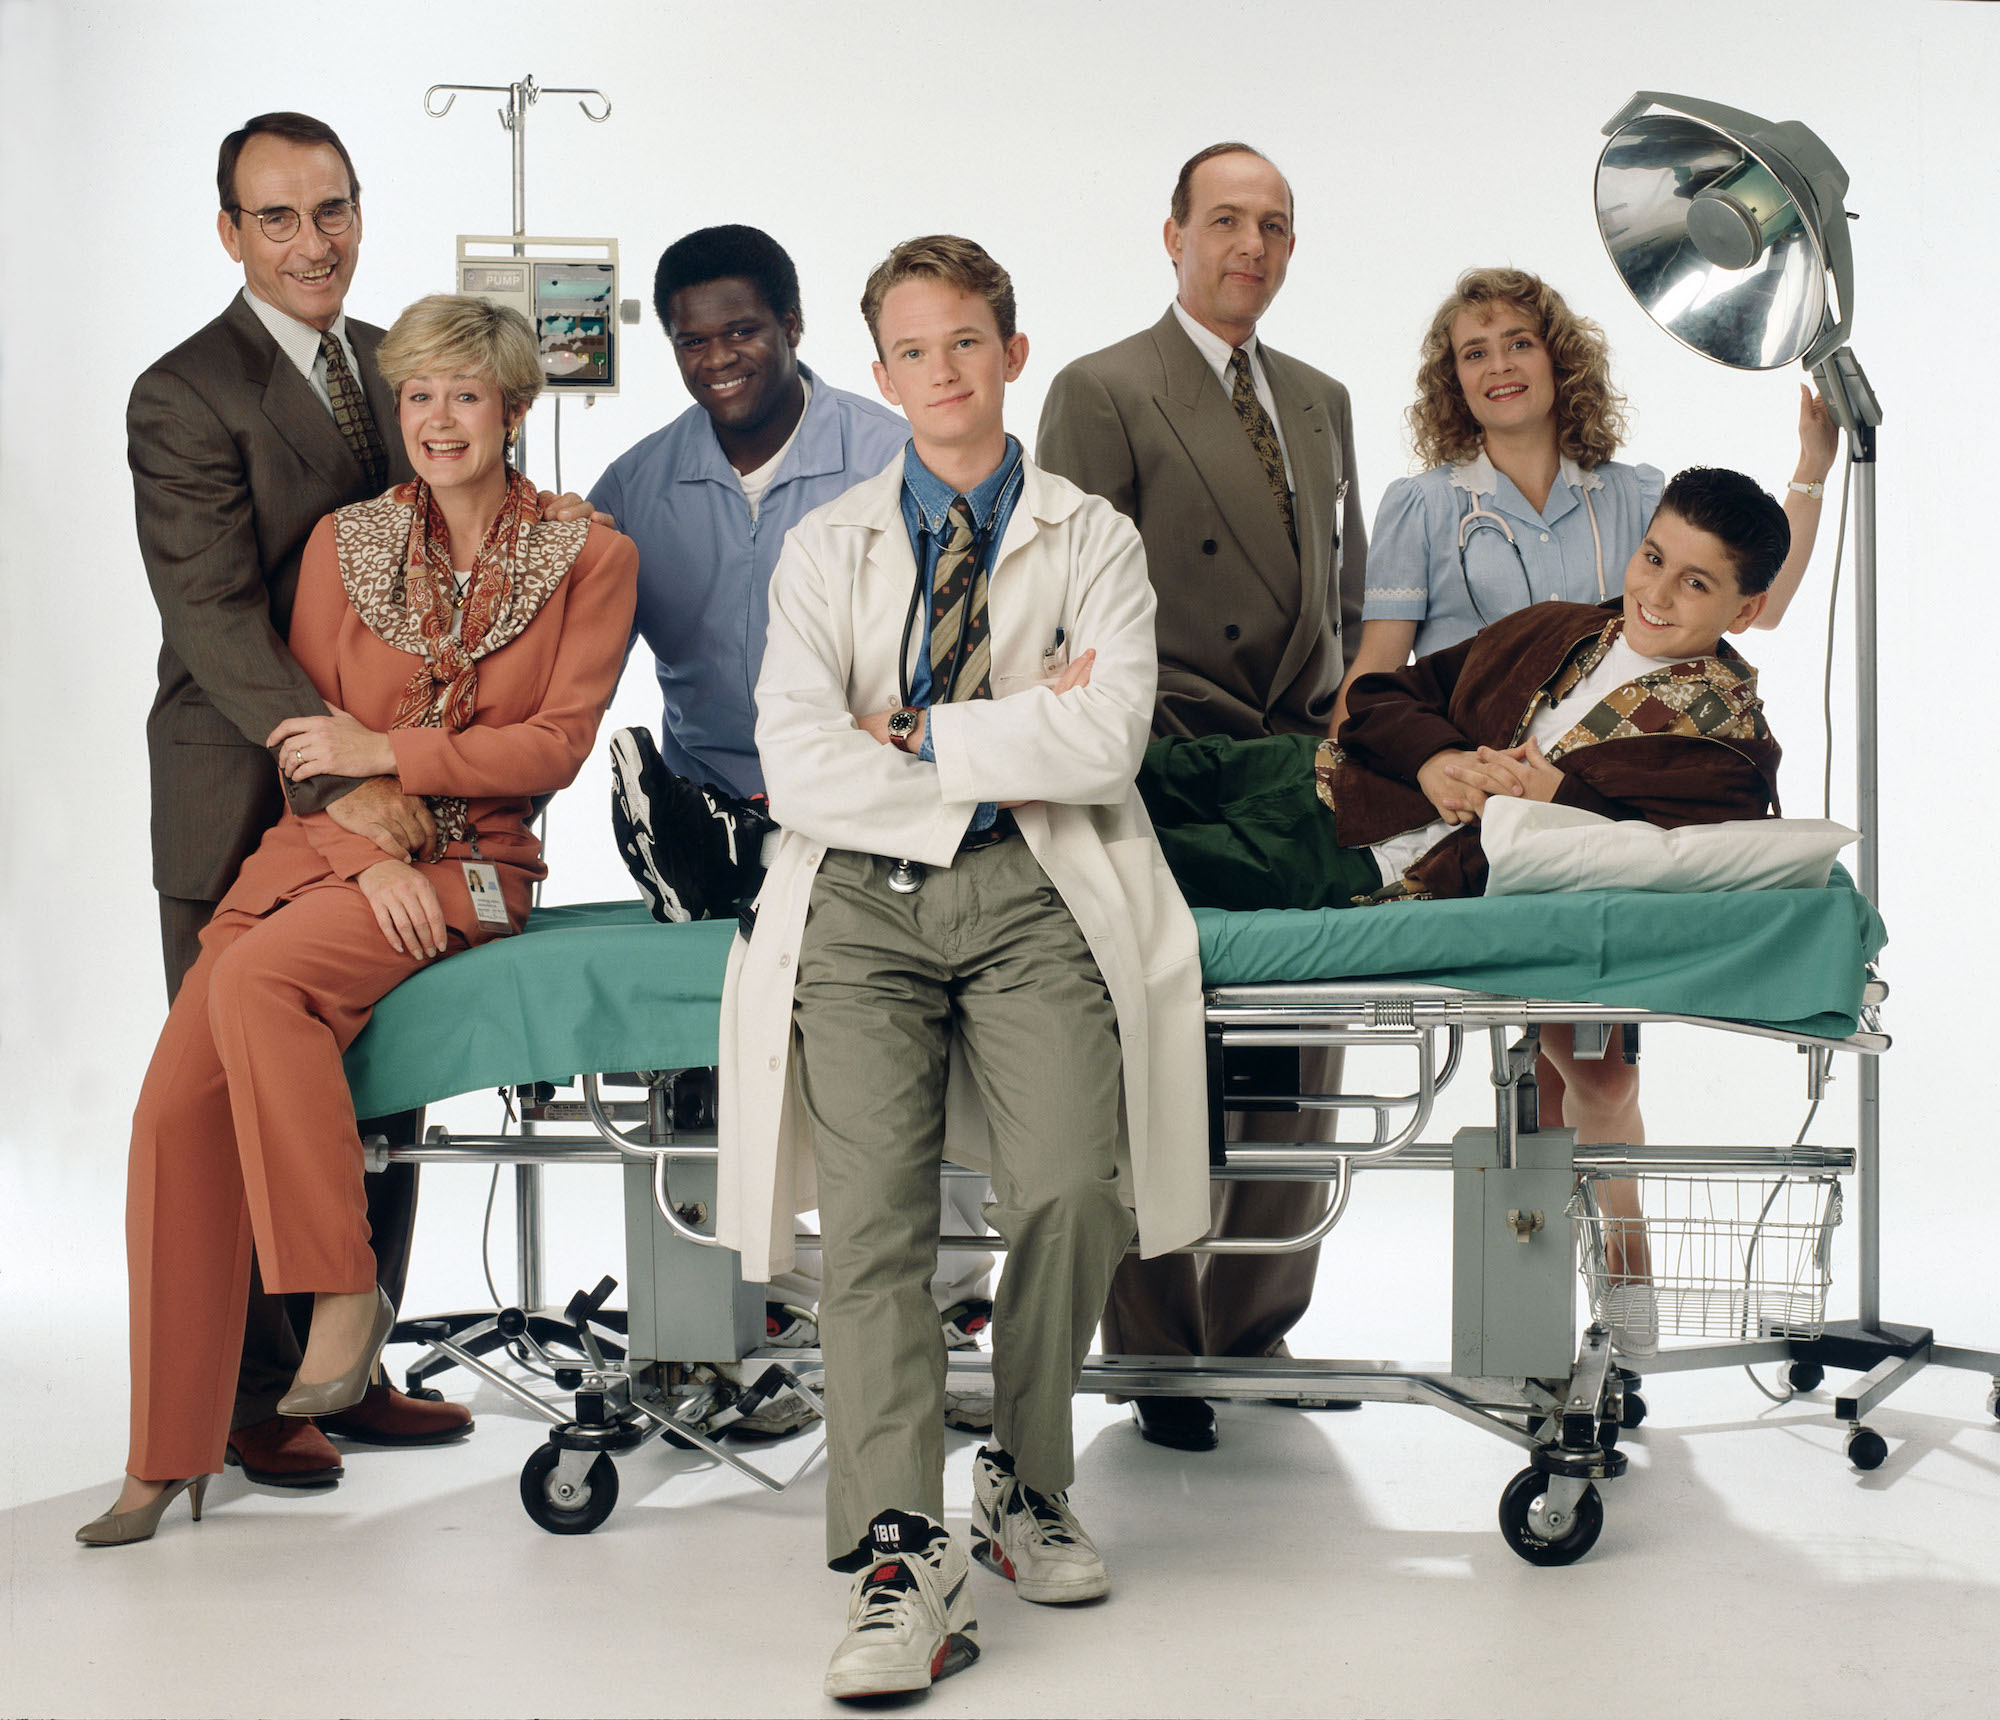 Cast of 'Doogie Howser, M.D.' gathered around a stretcher and medical lights